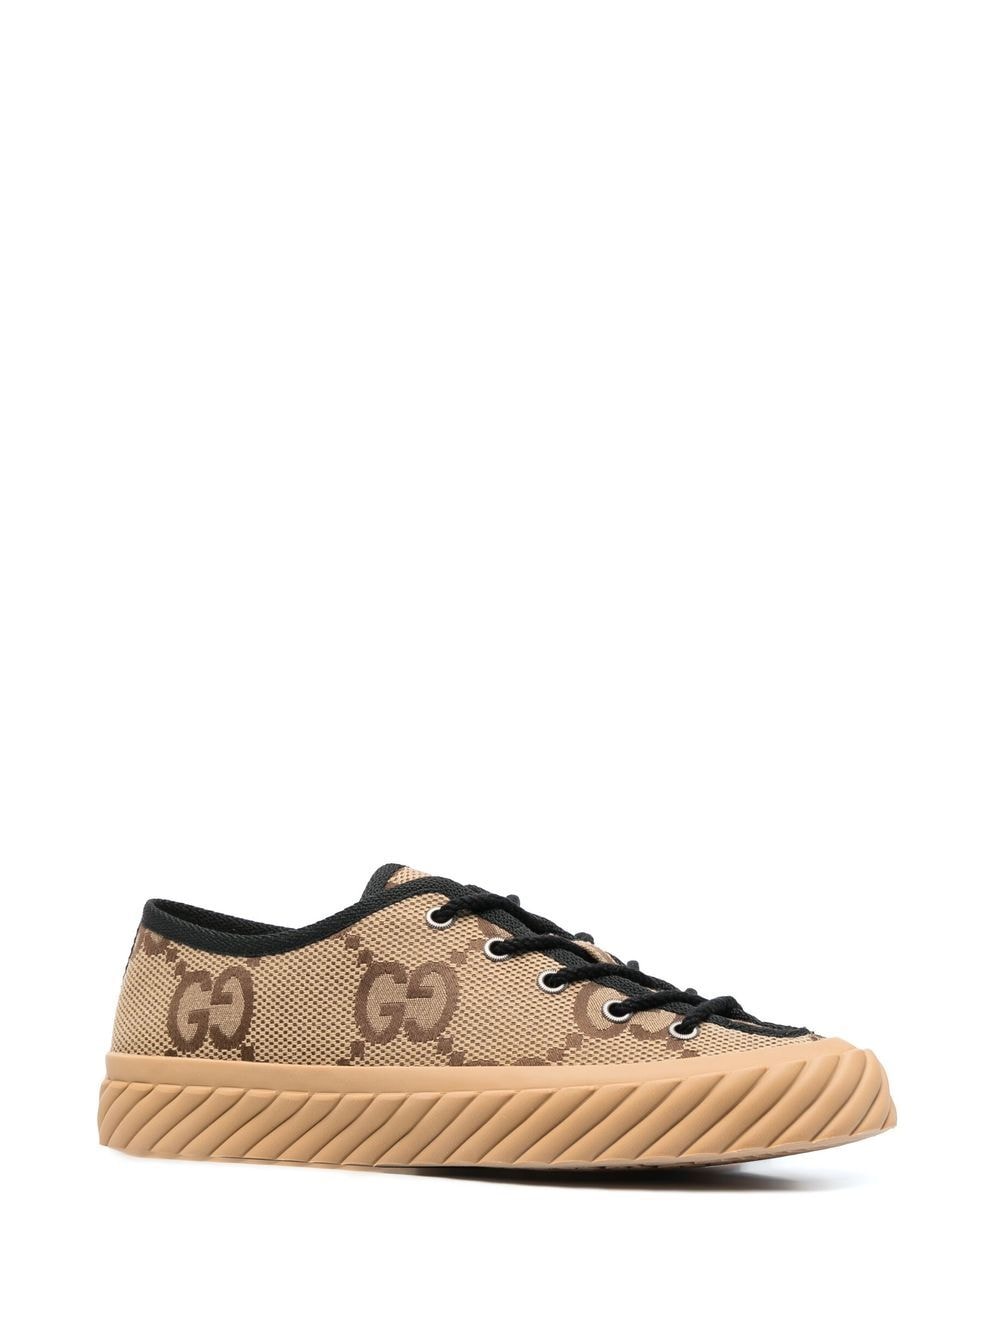 Gucci GG Supreme low-top sneakers - Beige